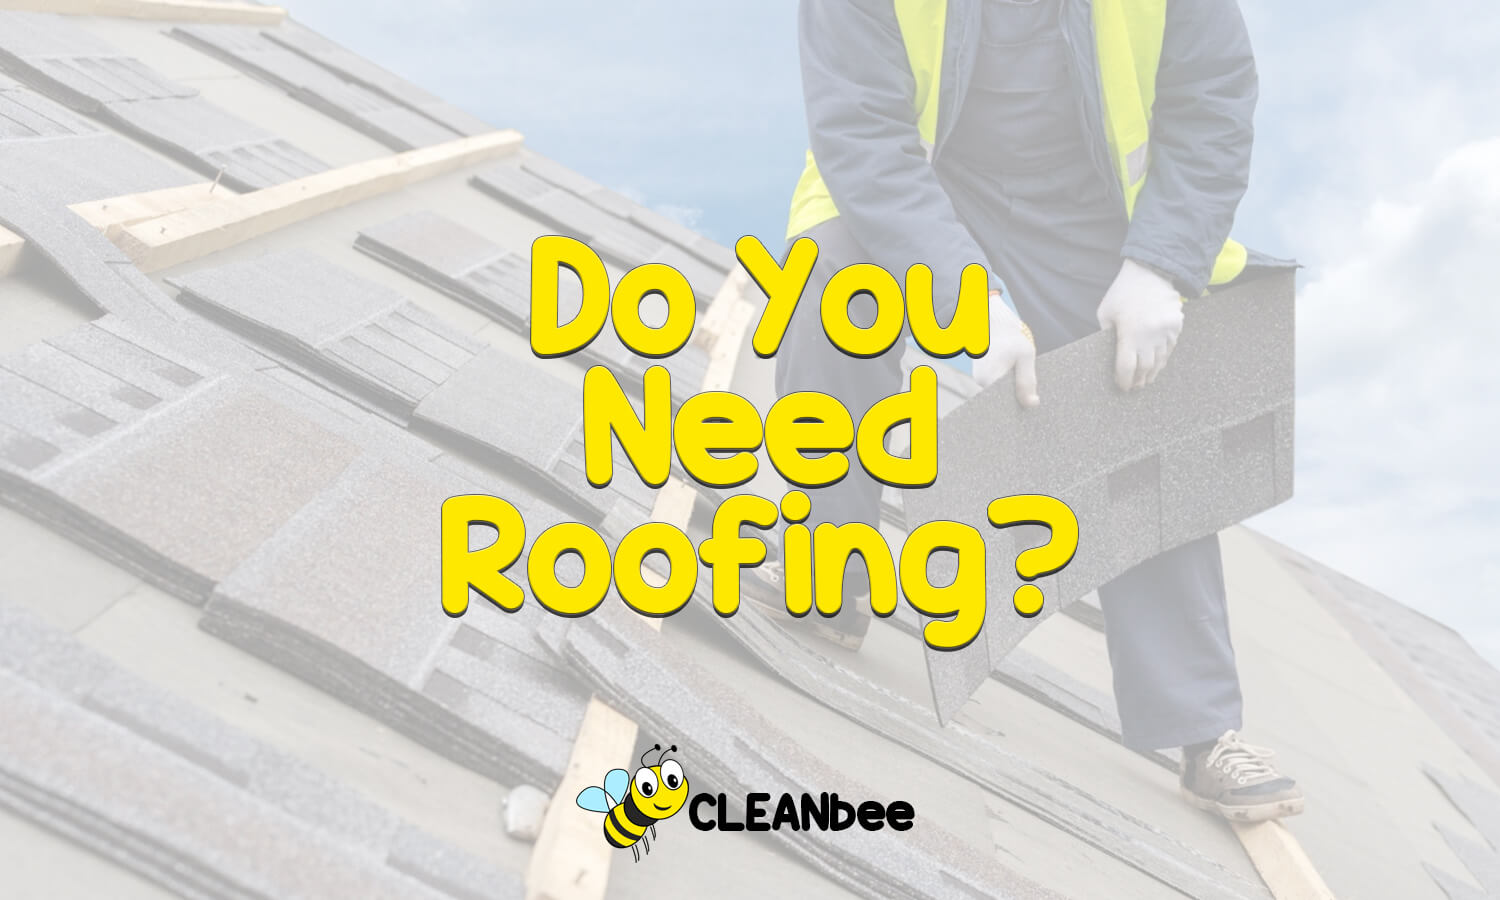 Do You Need Roofing?